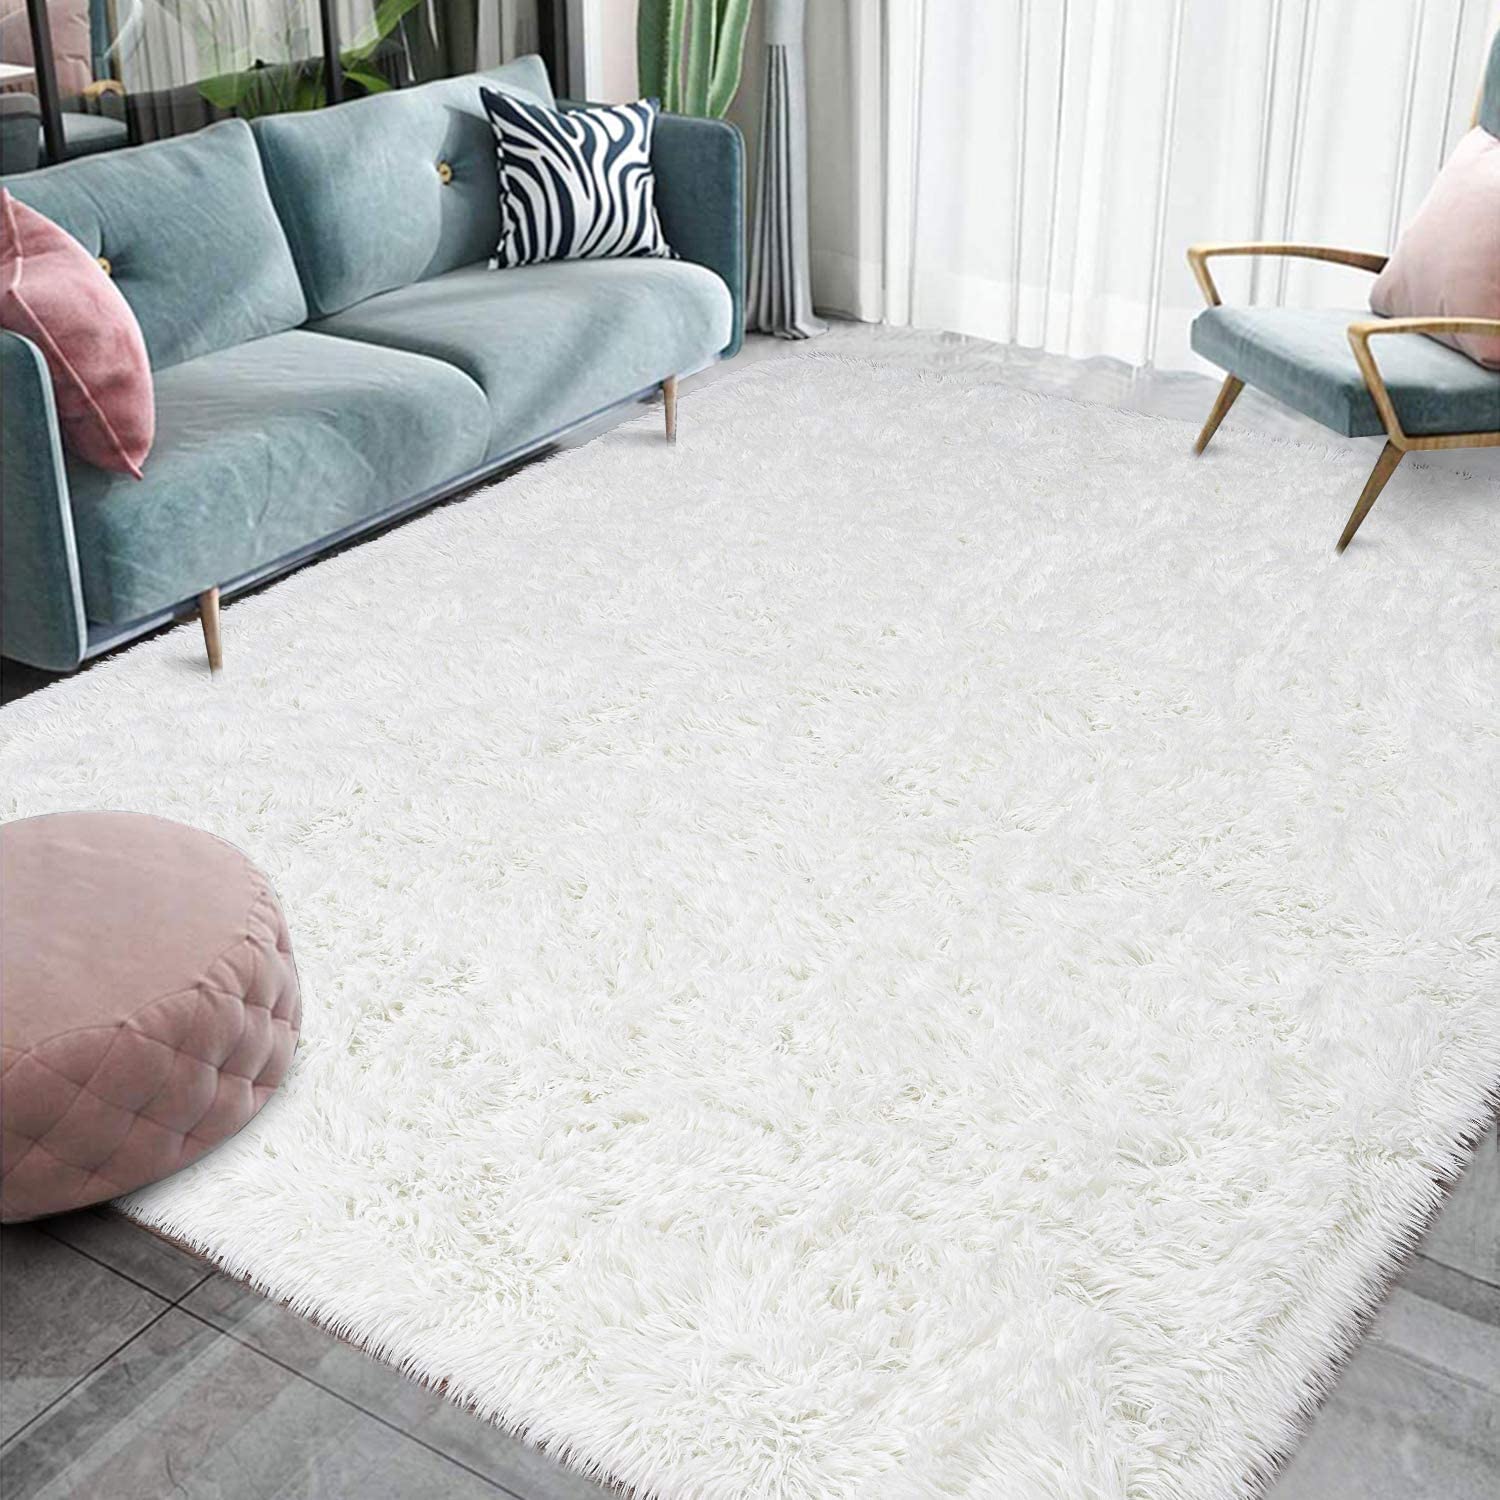 White Color for Warm Rugs in Interior